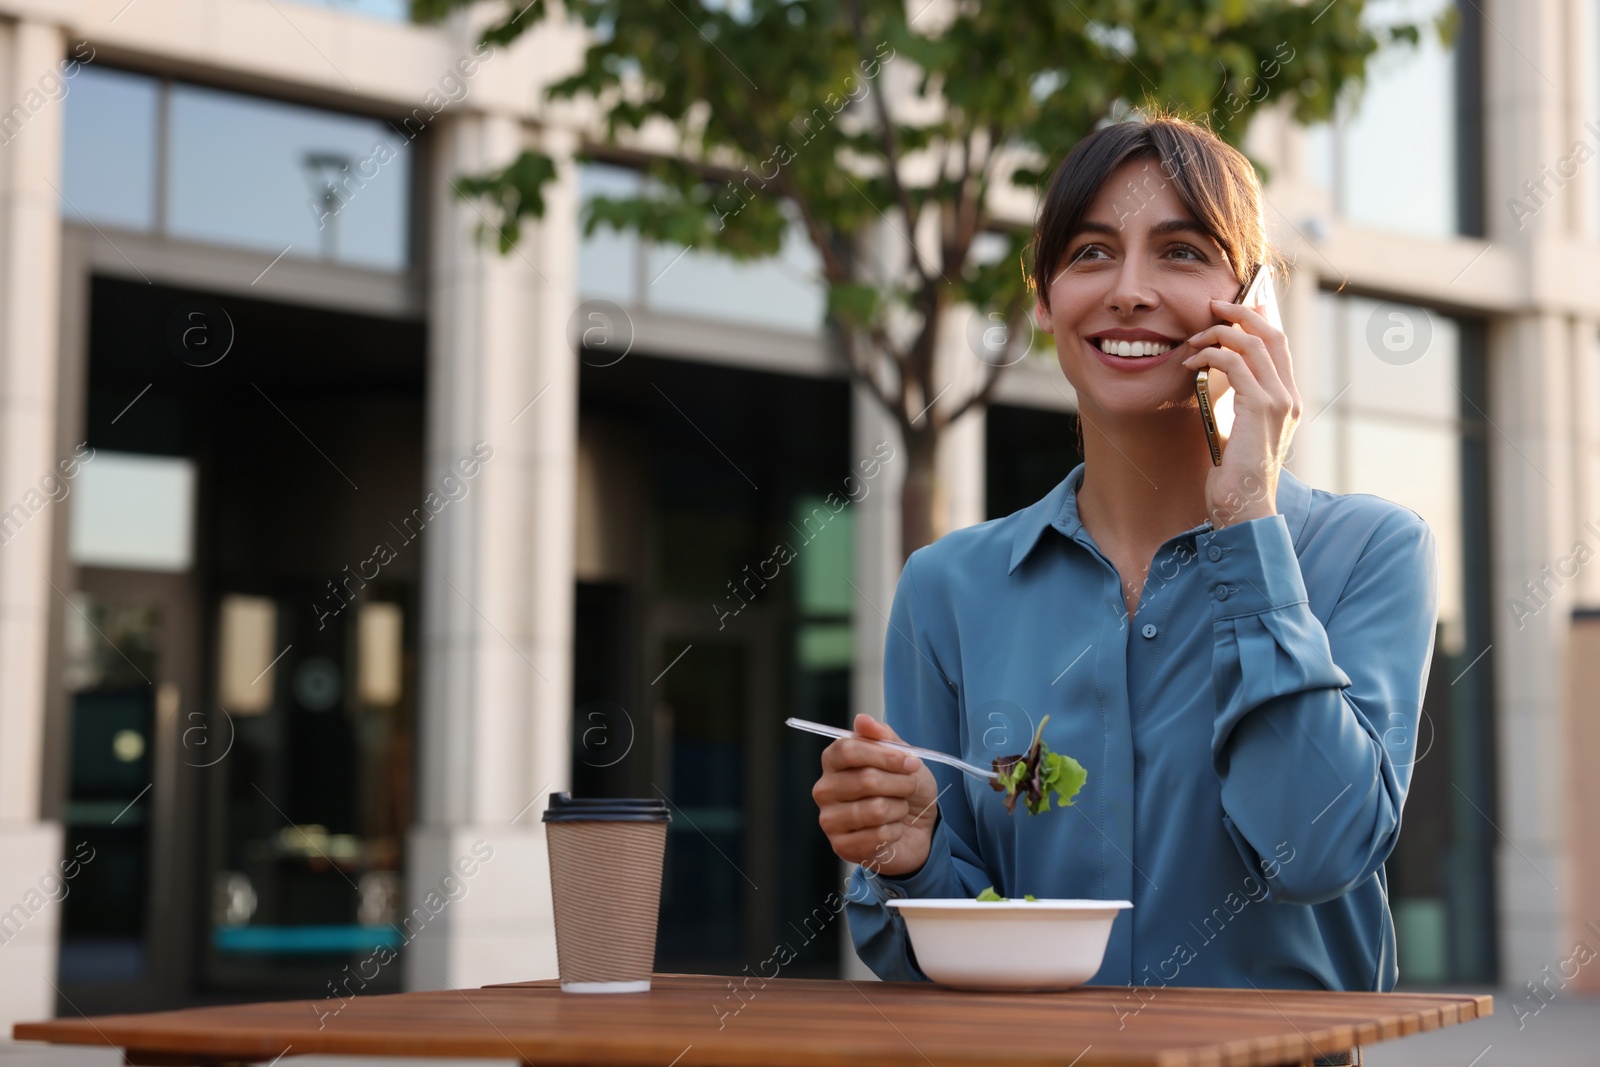 Photo of Happy businesswoman with plastic bowl of salad talking on smartphone during lunch at wooden table outdoors